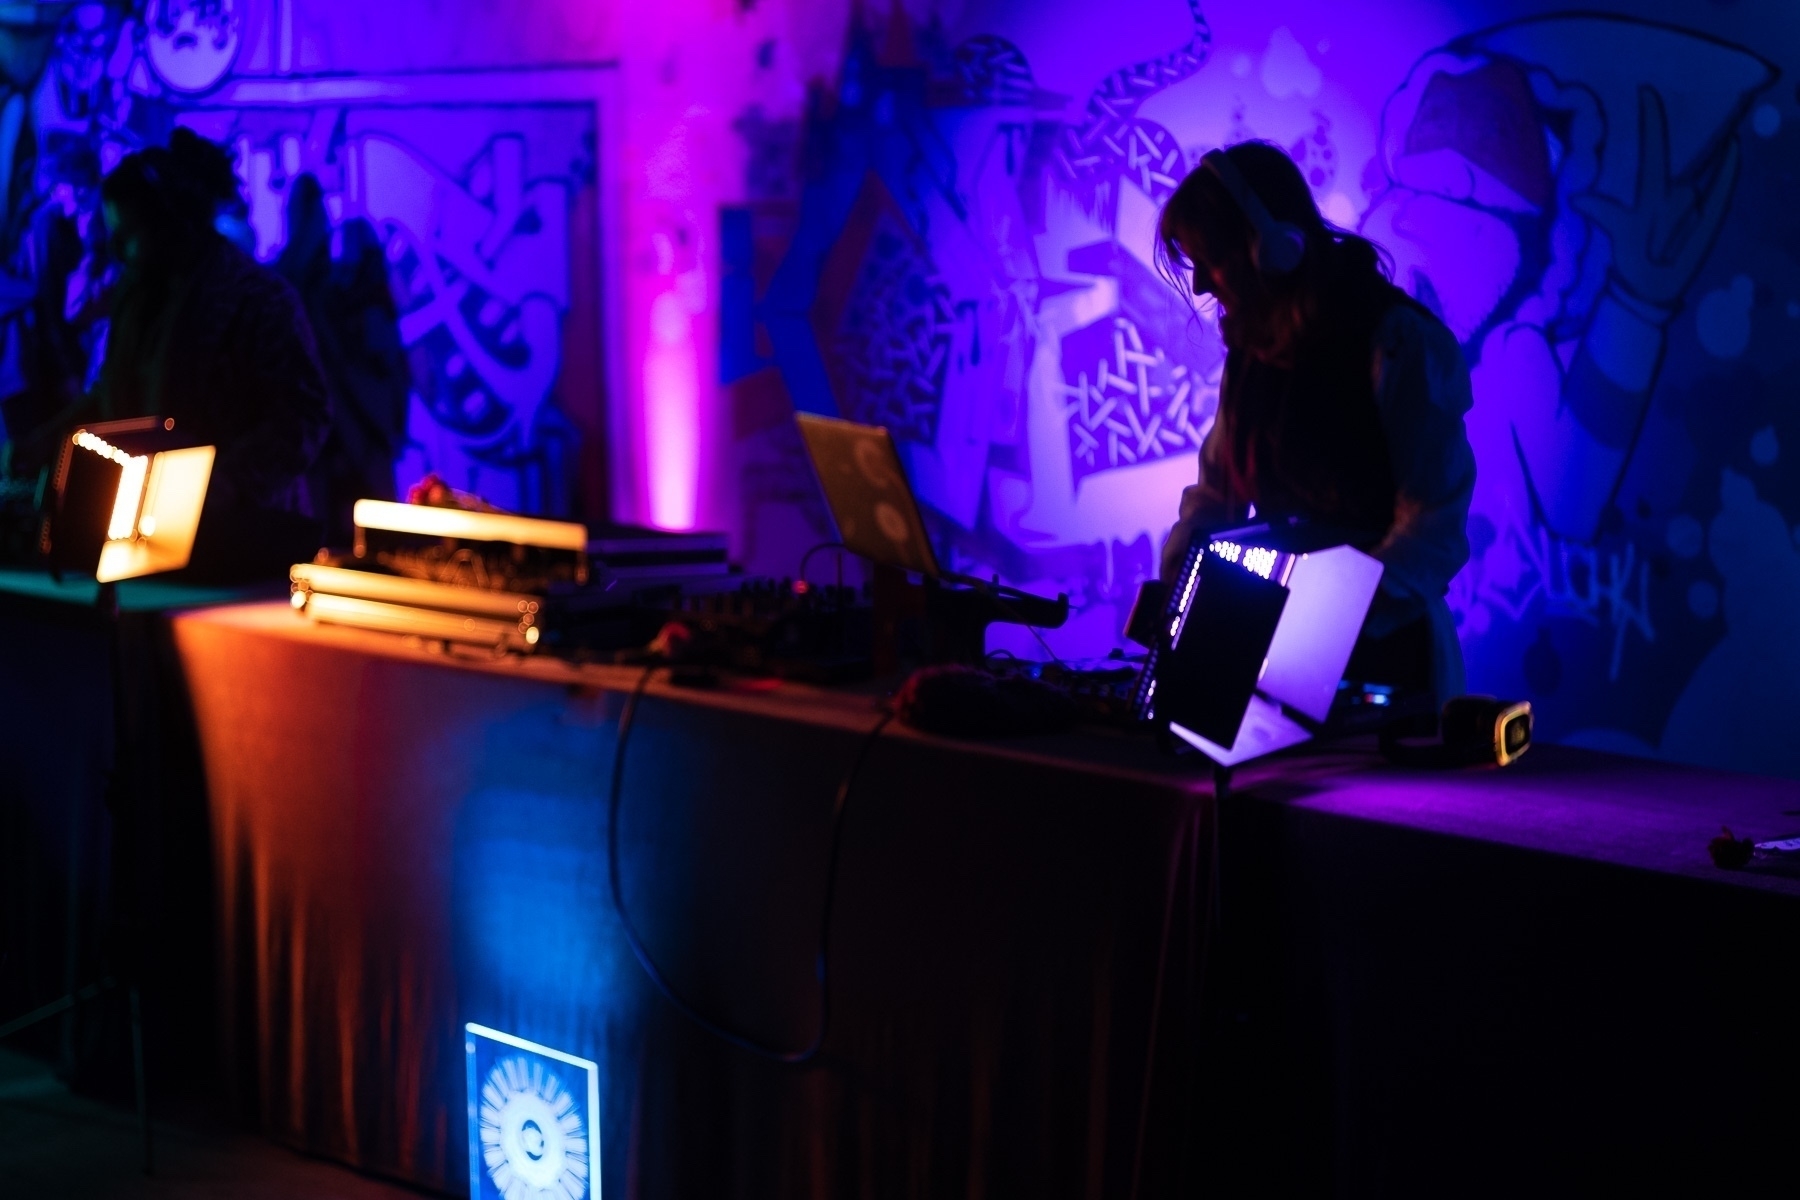 DJs at a silent disco in a dimly lit space with bright pops of colorful lights and a background wall of graffiti.